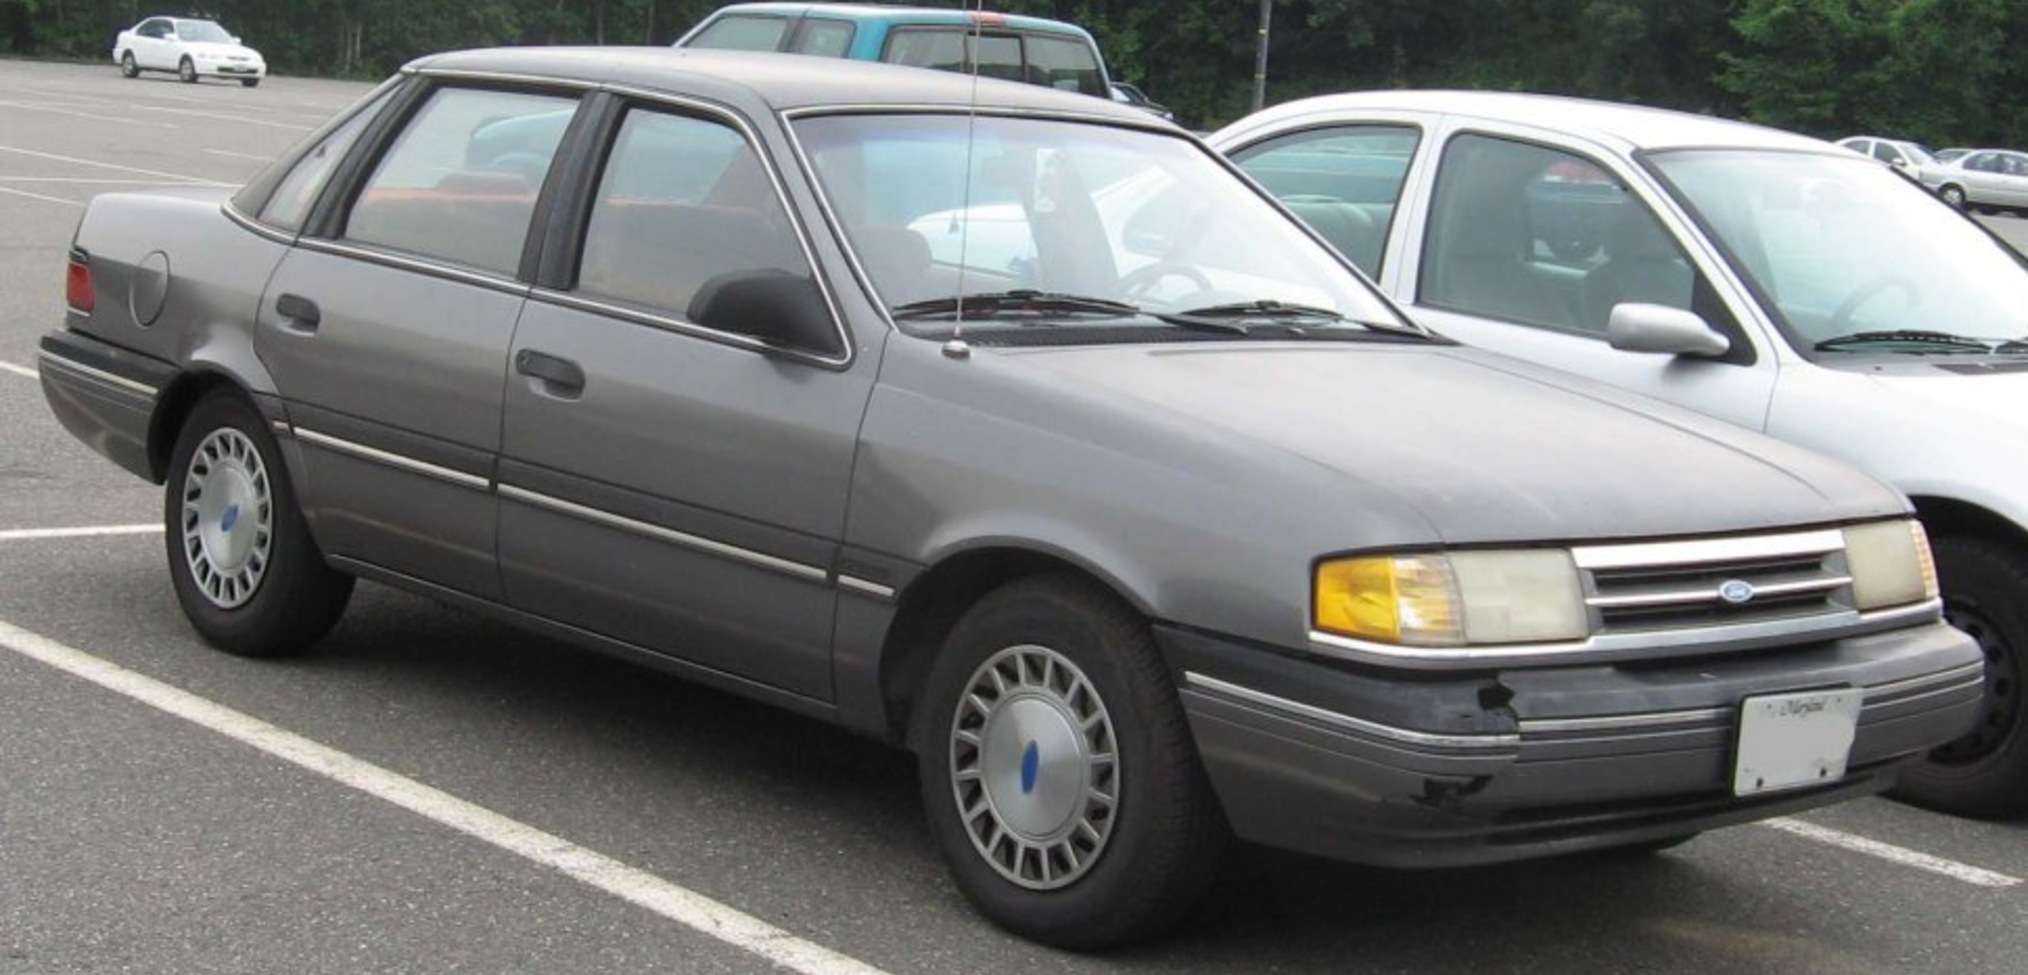 Ford Tempo 2.3 AWD (102 Hp) 1989, 1990, 1991, 1992, 1993, 1994, 1995